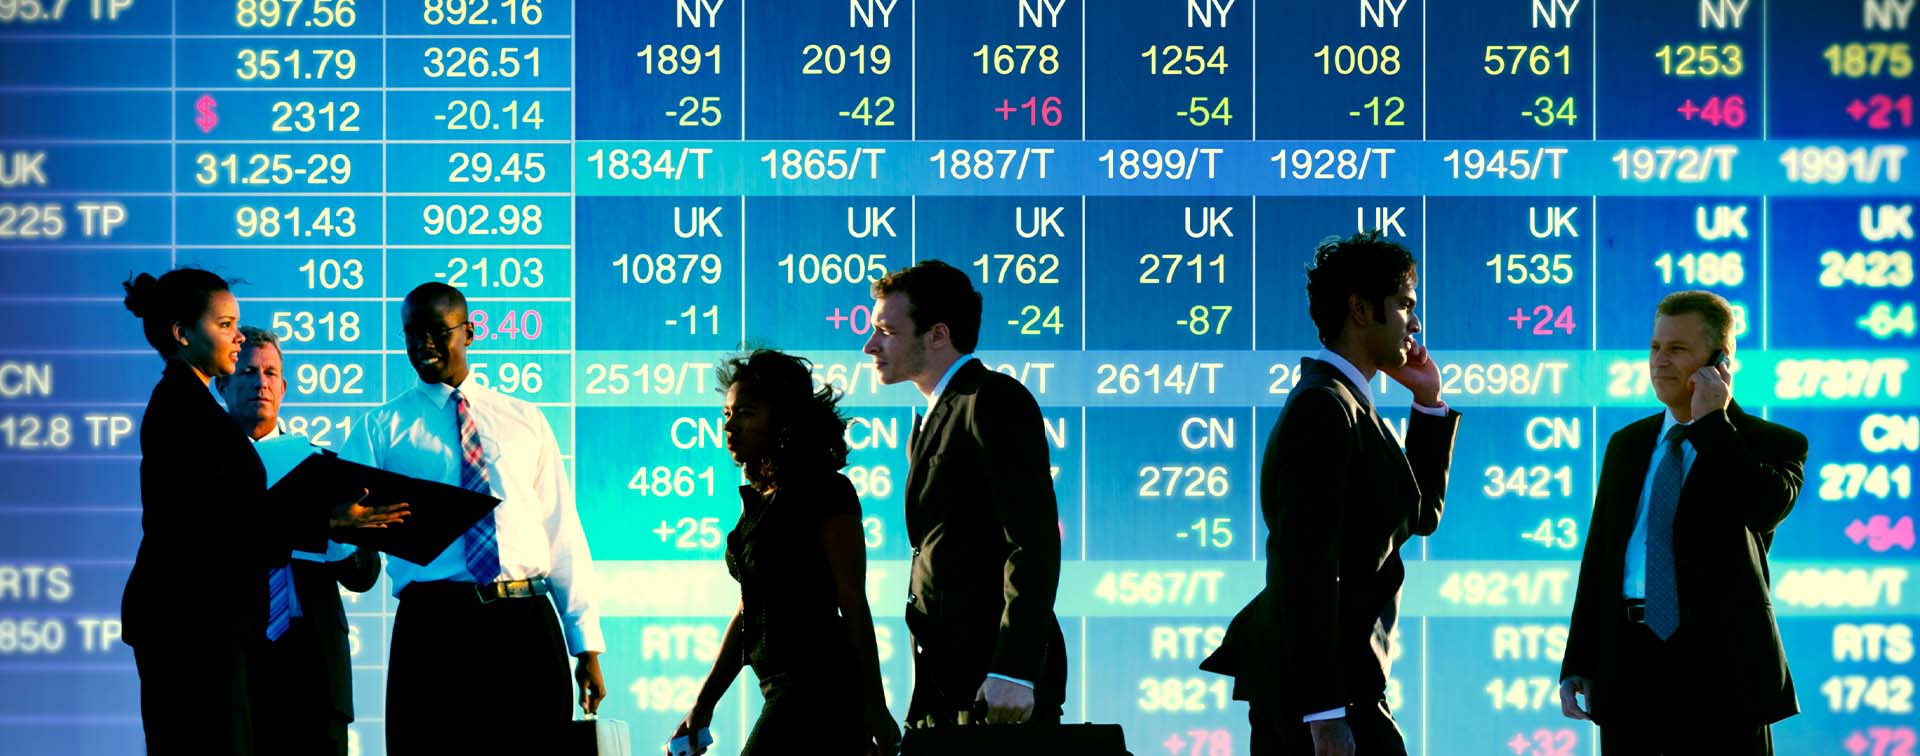 Stock exchange trading floor with business traders in suits betting on international markets